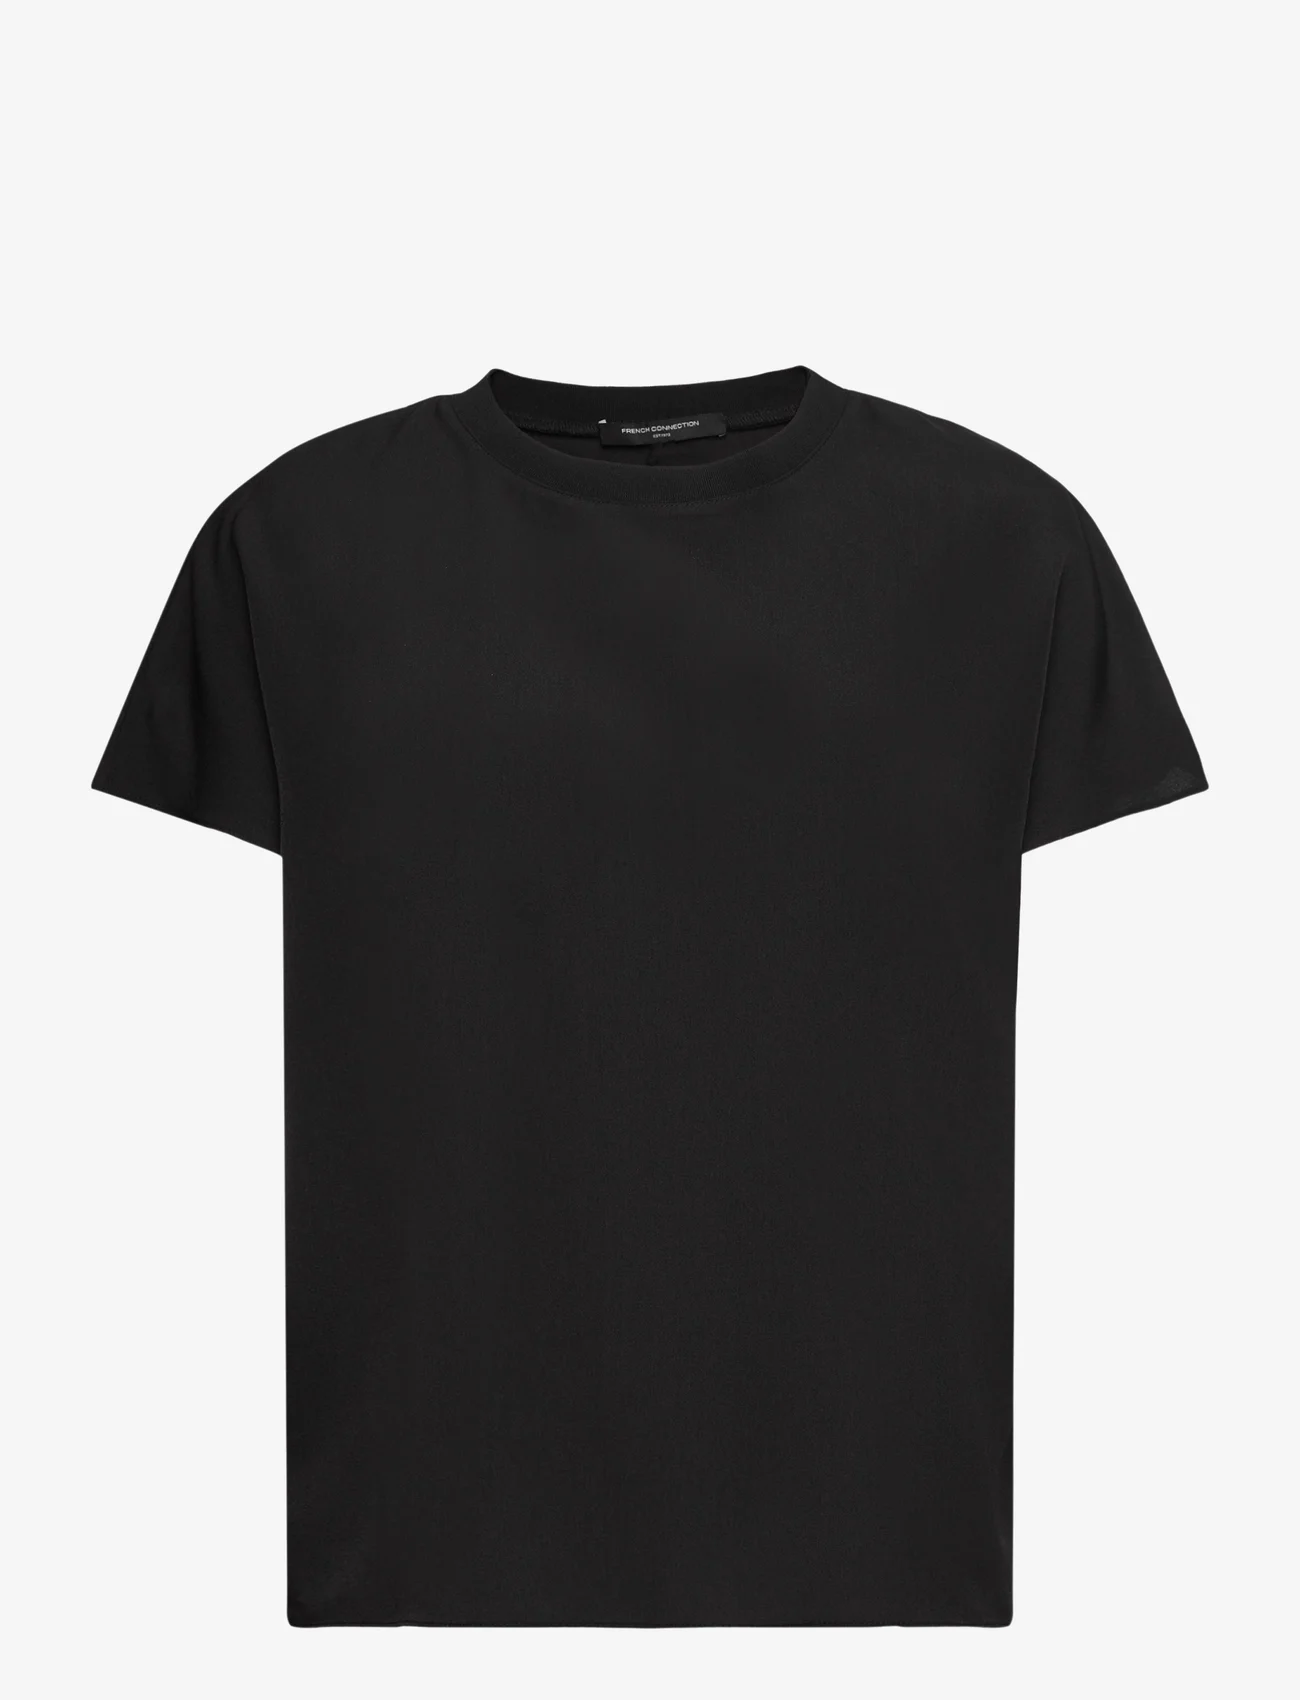 French Connection - CREPE LIGHT CREW NECK TOP - t-shirts - black - 1